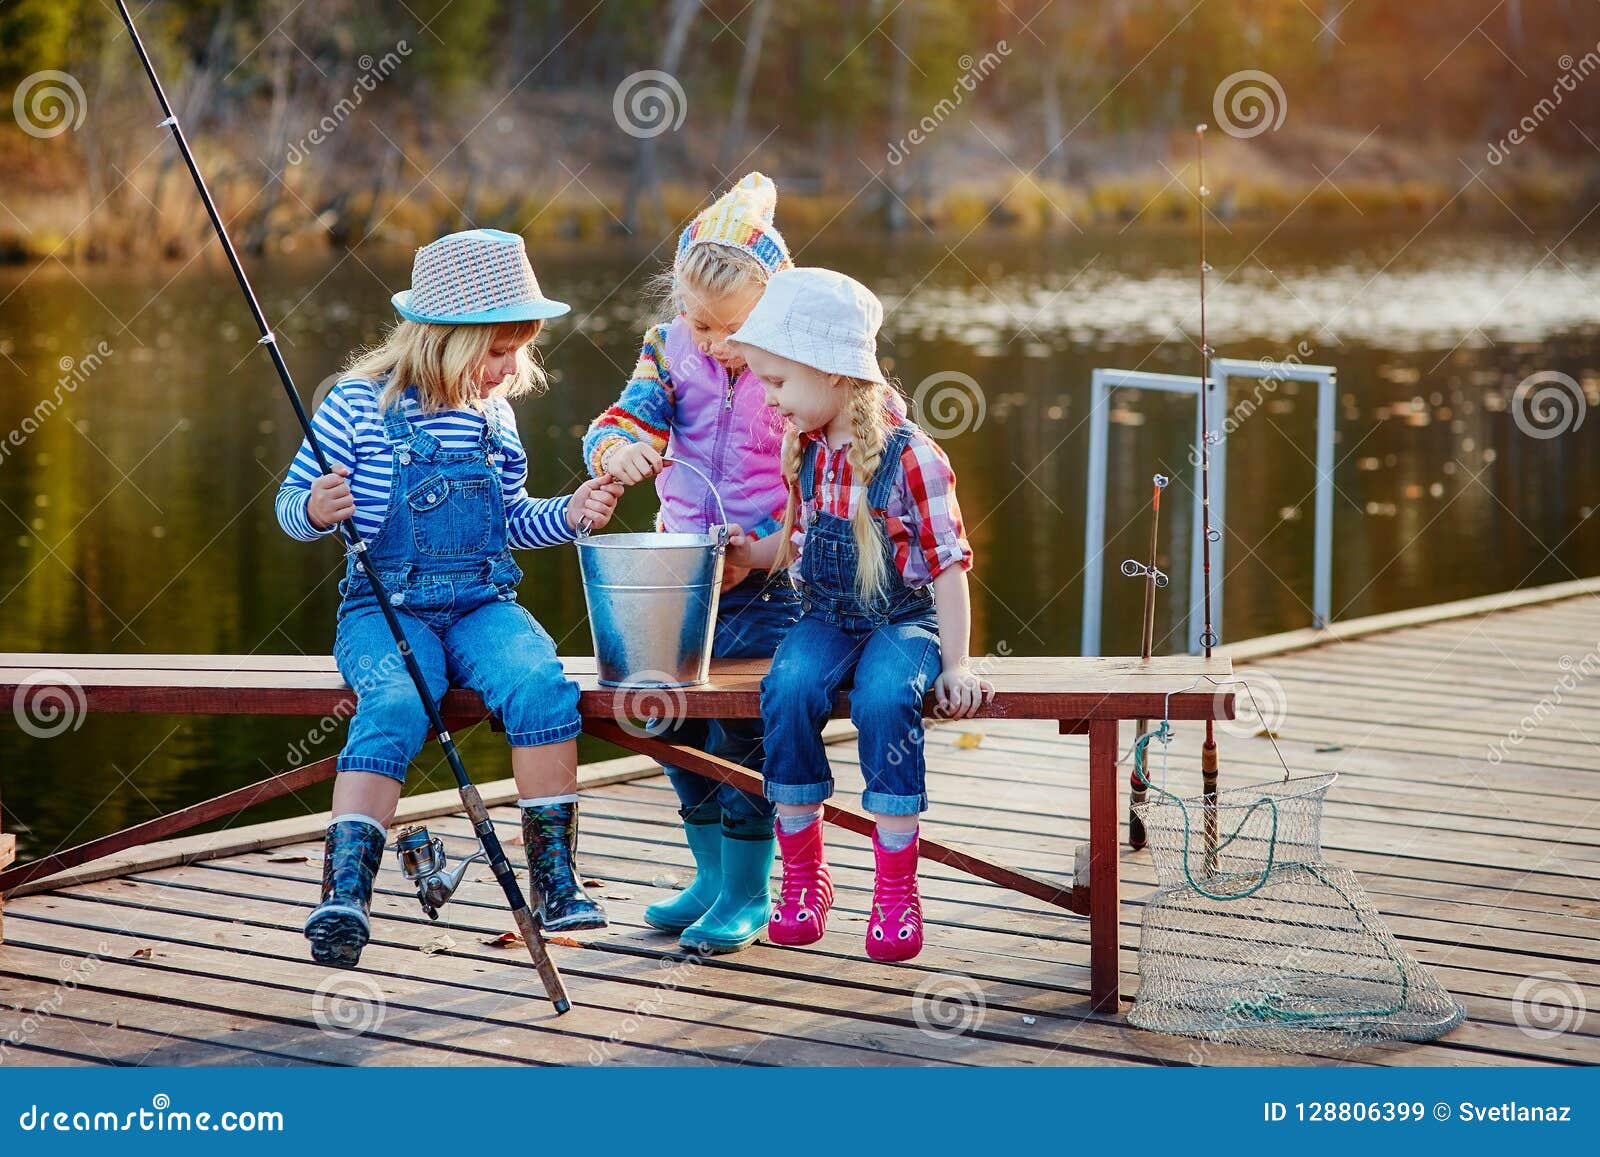 Two little girls with fishing rods, sitting on a wooden pontoon and  bragging of caught fish Stock Photo